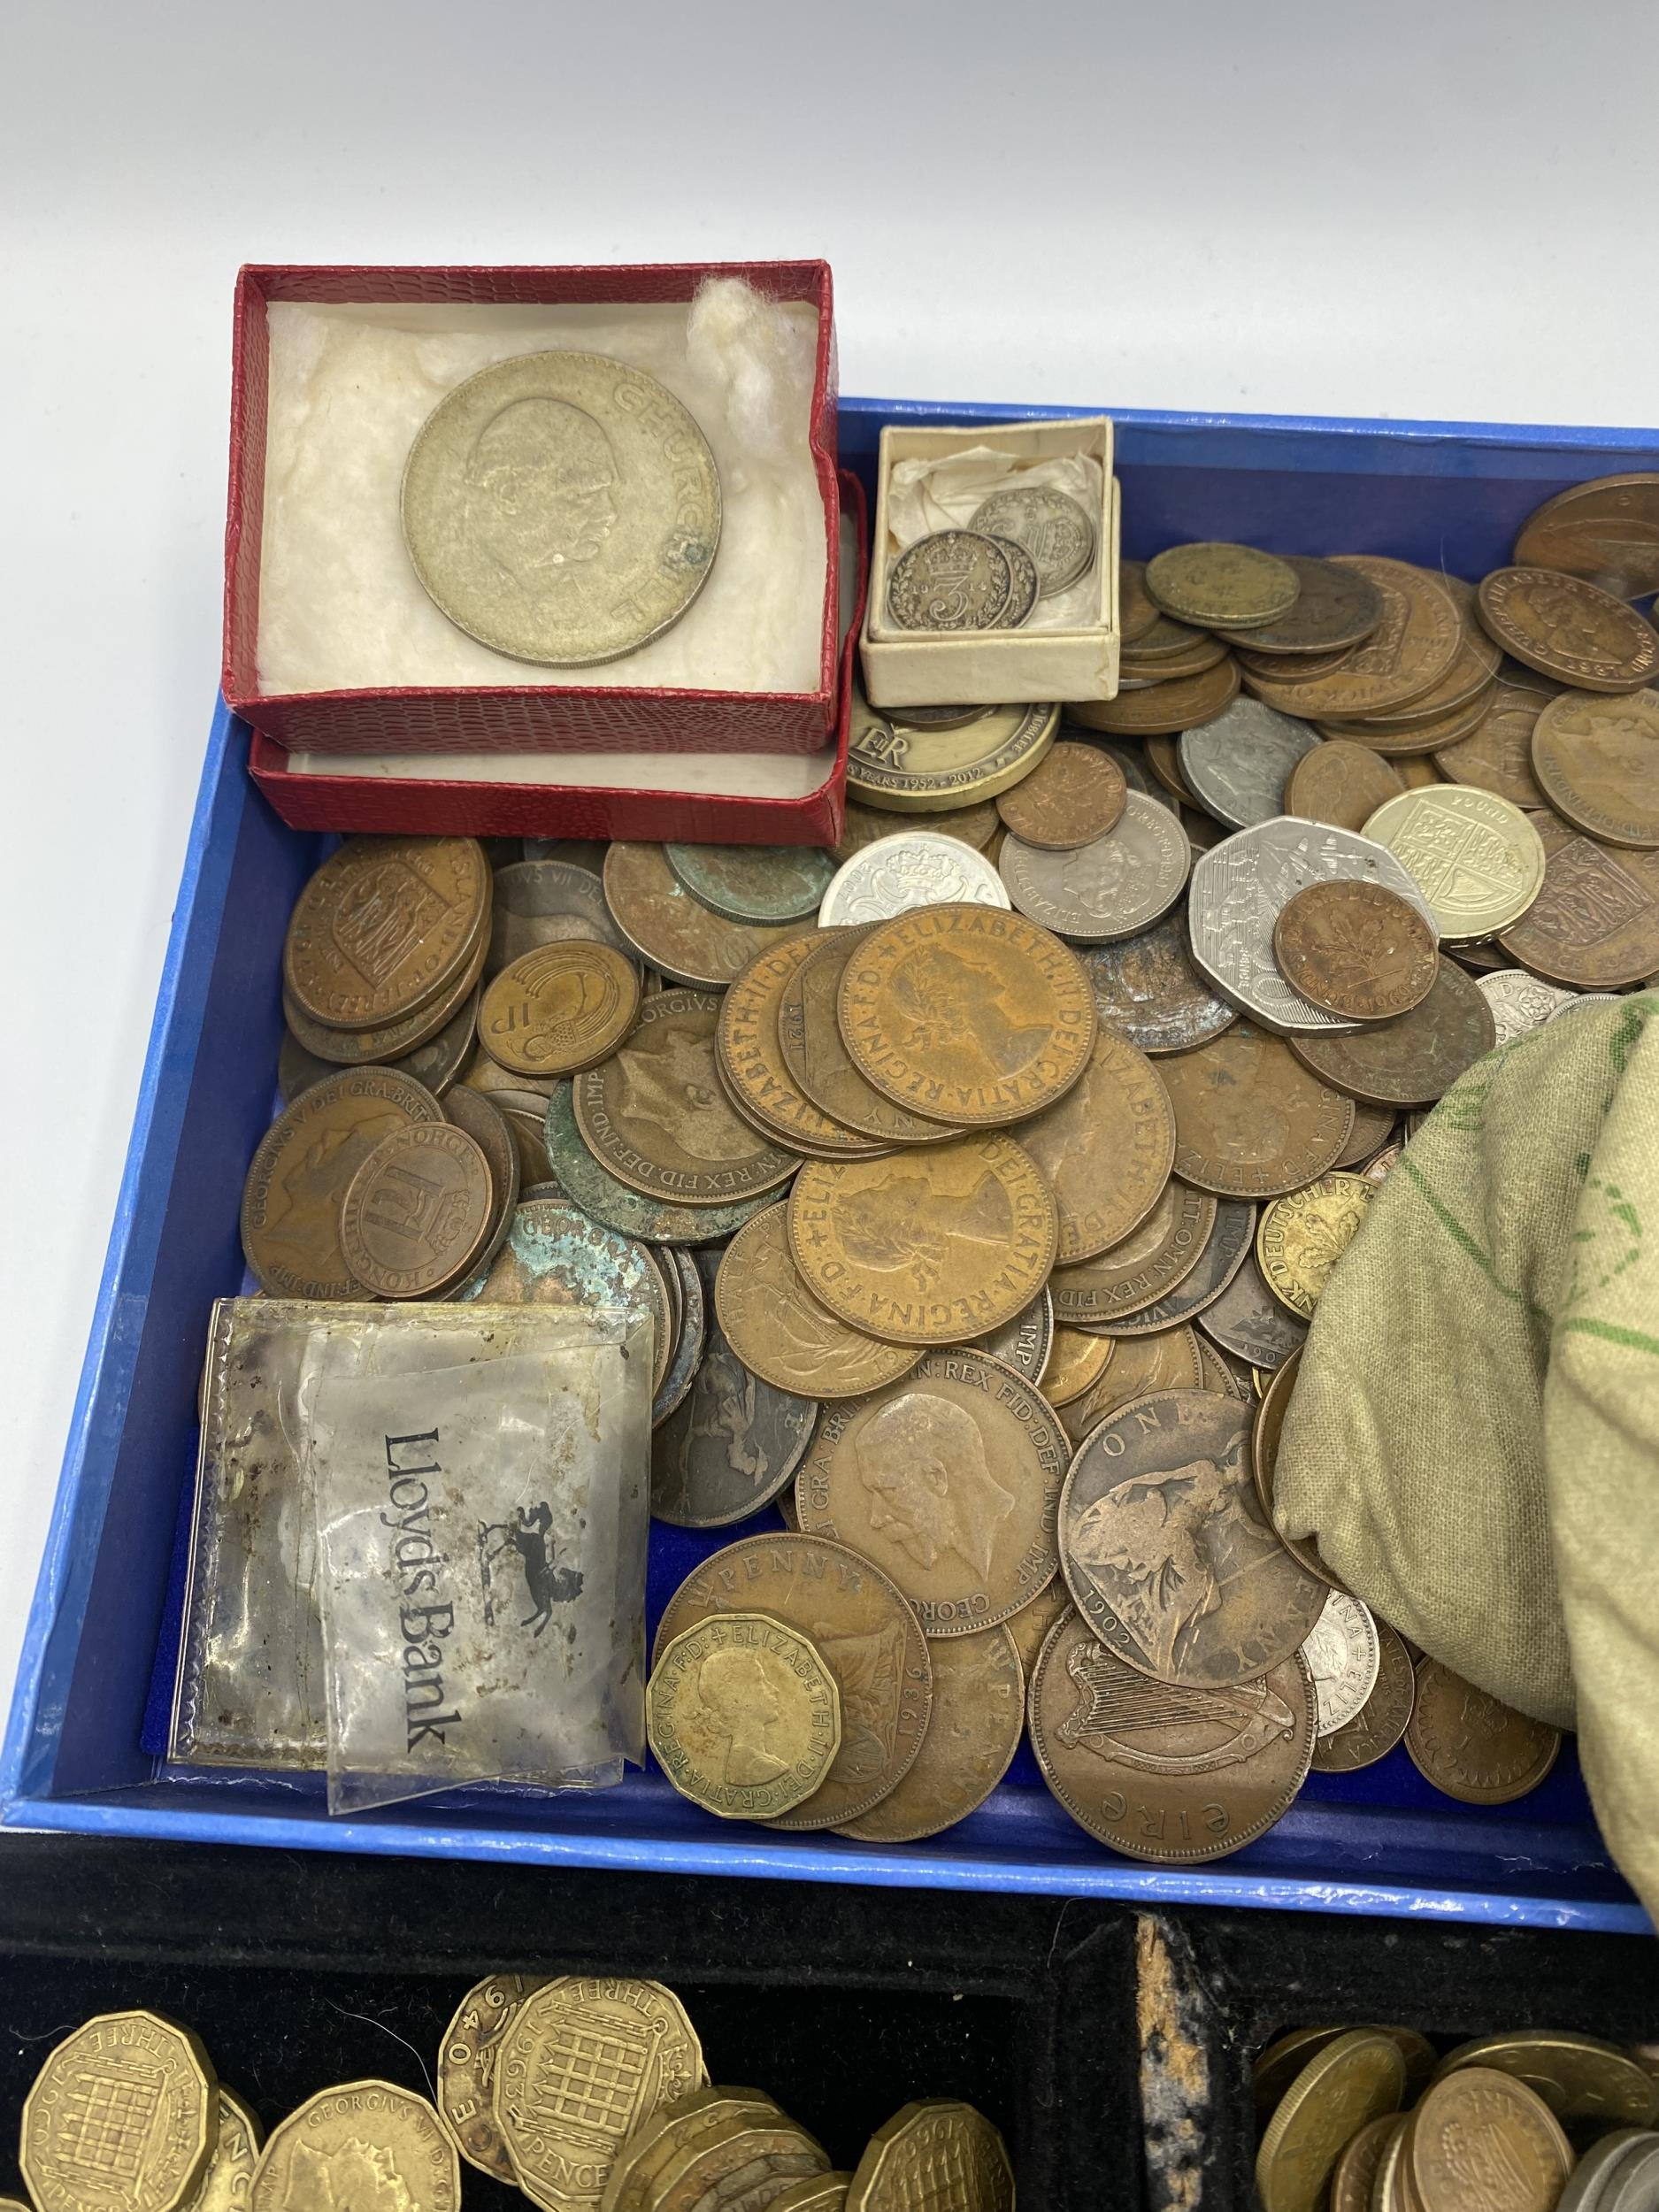 A collection of 19th and 20th century British coinage. - Image 4 of 6